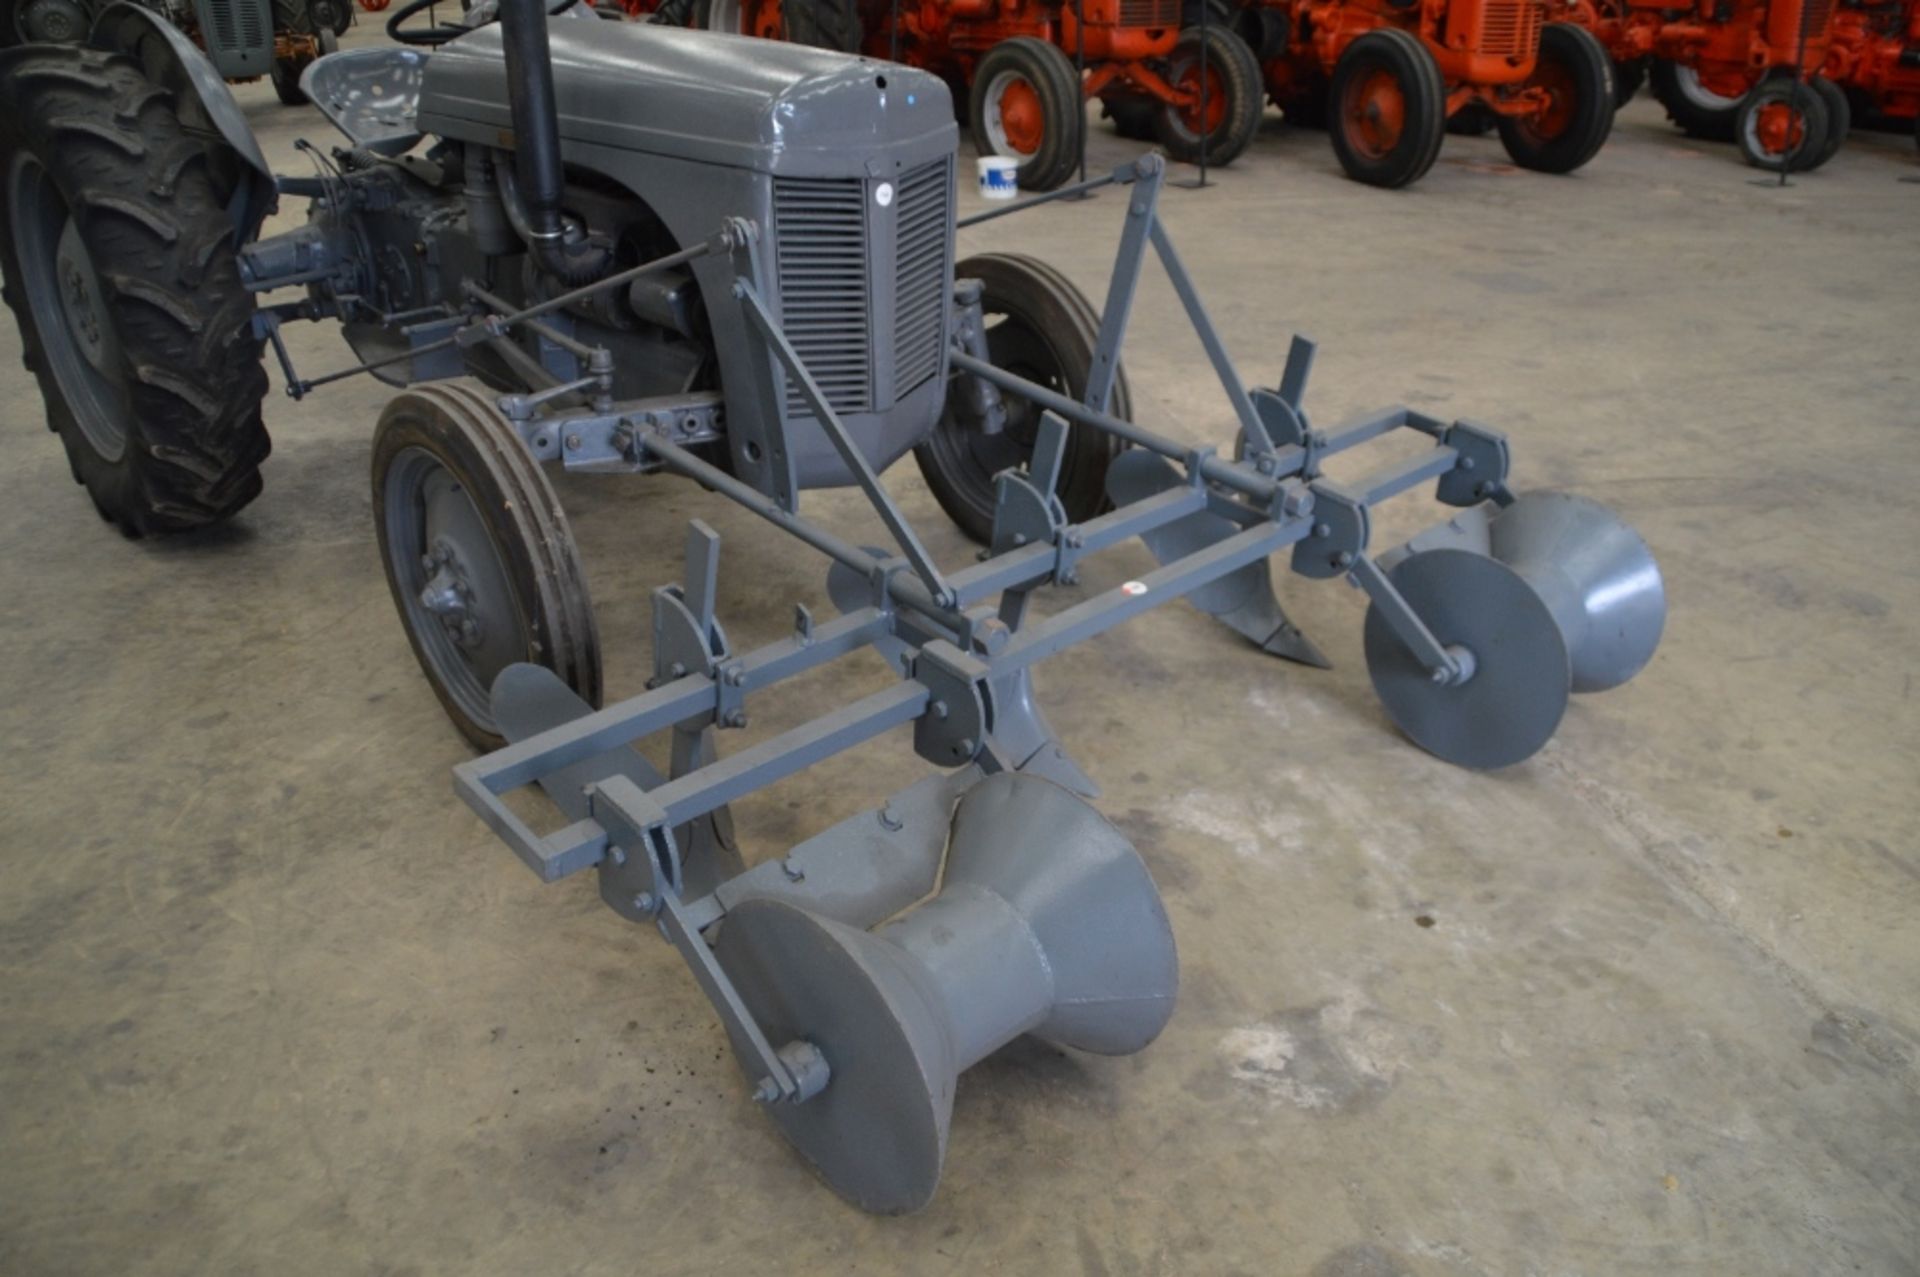 1955 FERGUSON TE-F20 4cylinder diesel TRACTOR Reg No: 816 XUK Serial No: TEF478618 This tractor, - Image 3 of 4